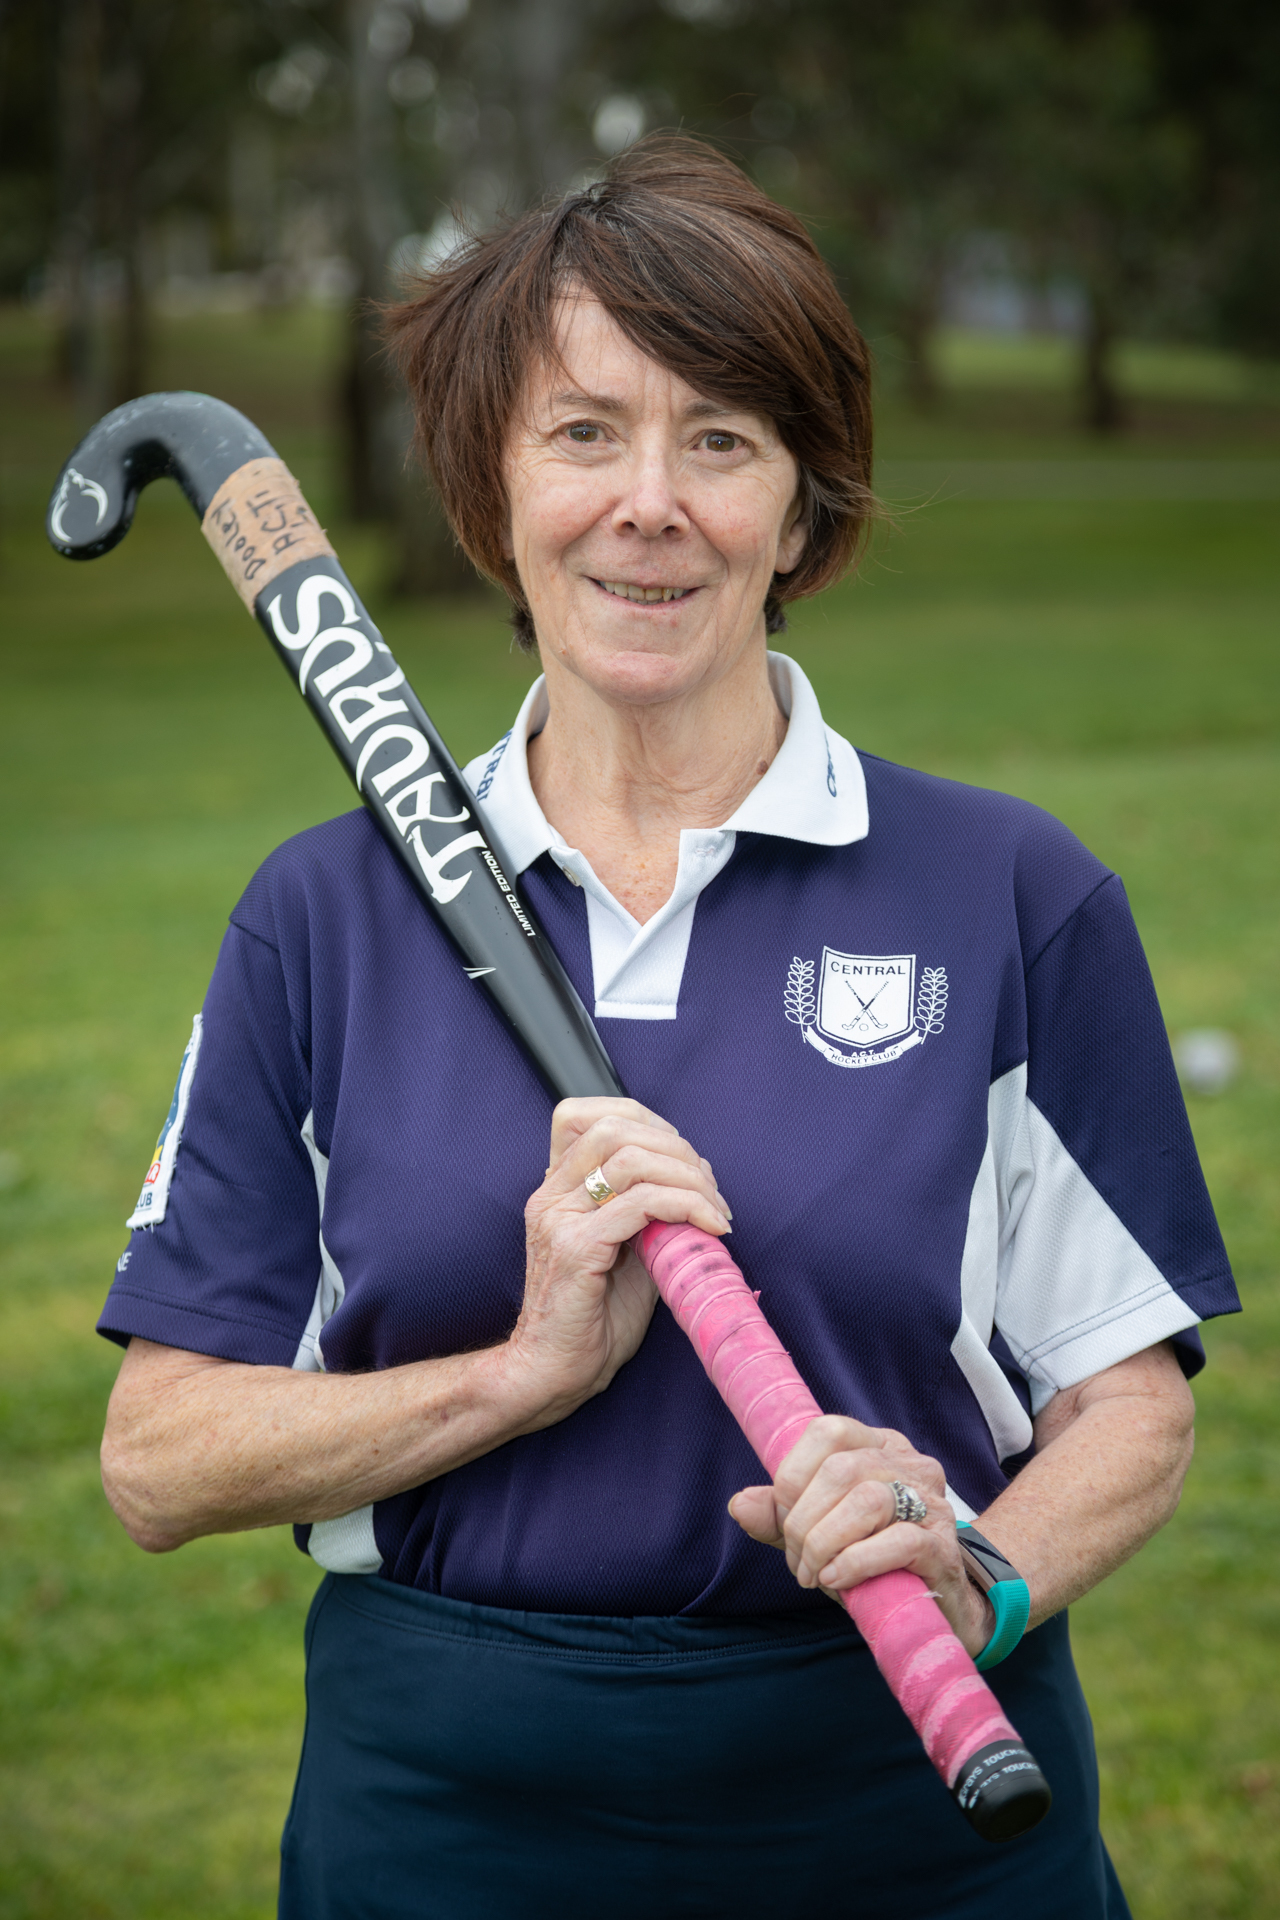 Hockeyroos co-captain's 67-year-old aunt makes history with Central Hockey Club